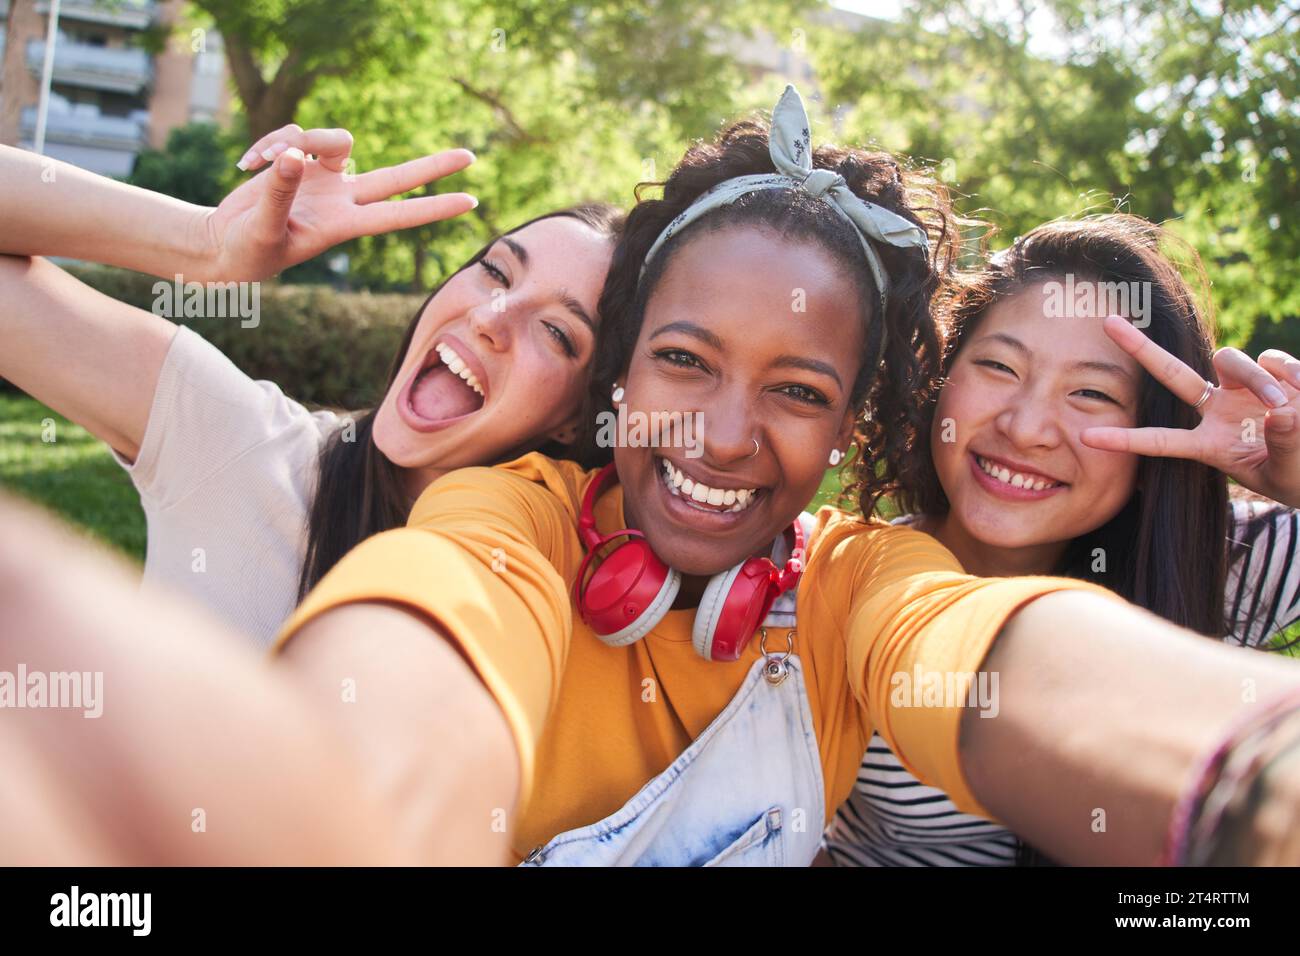 Selfie three excited multicultural cheerful young women outdoors. Attractive females having fun. Stock Photo